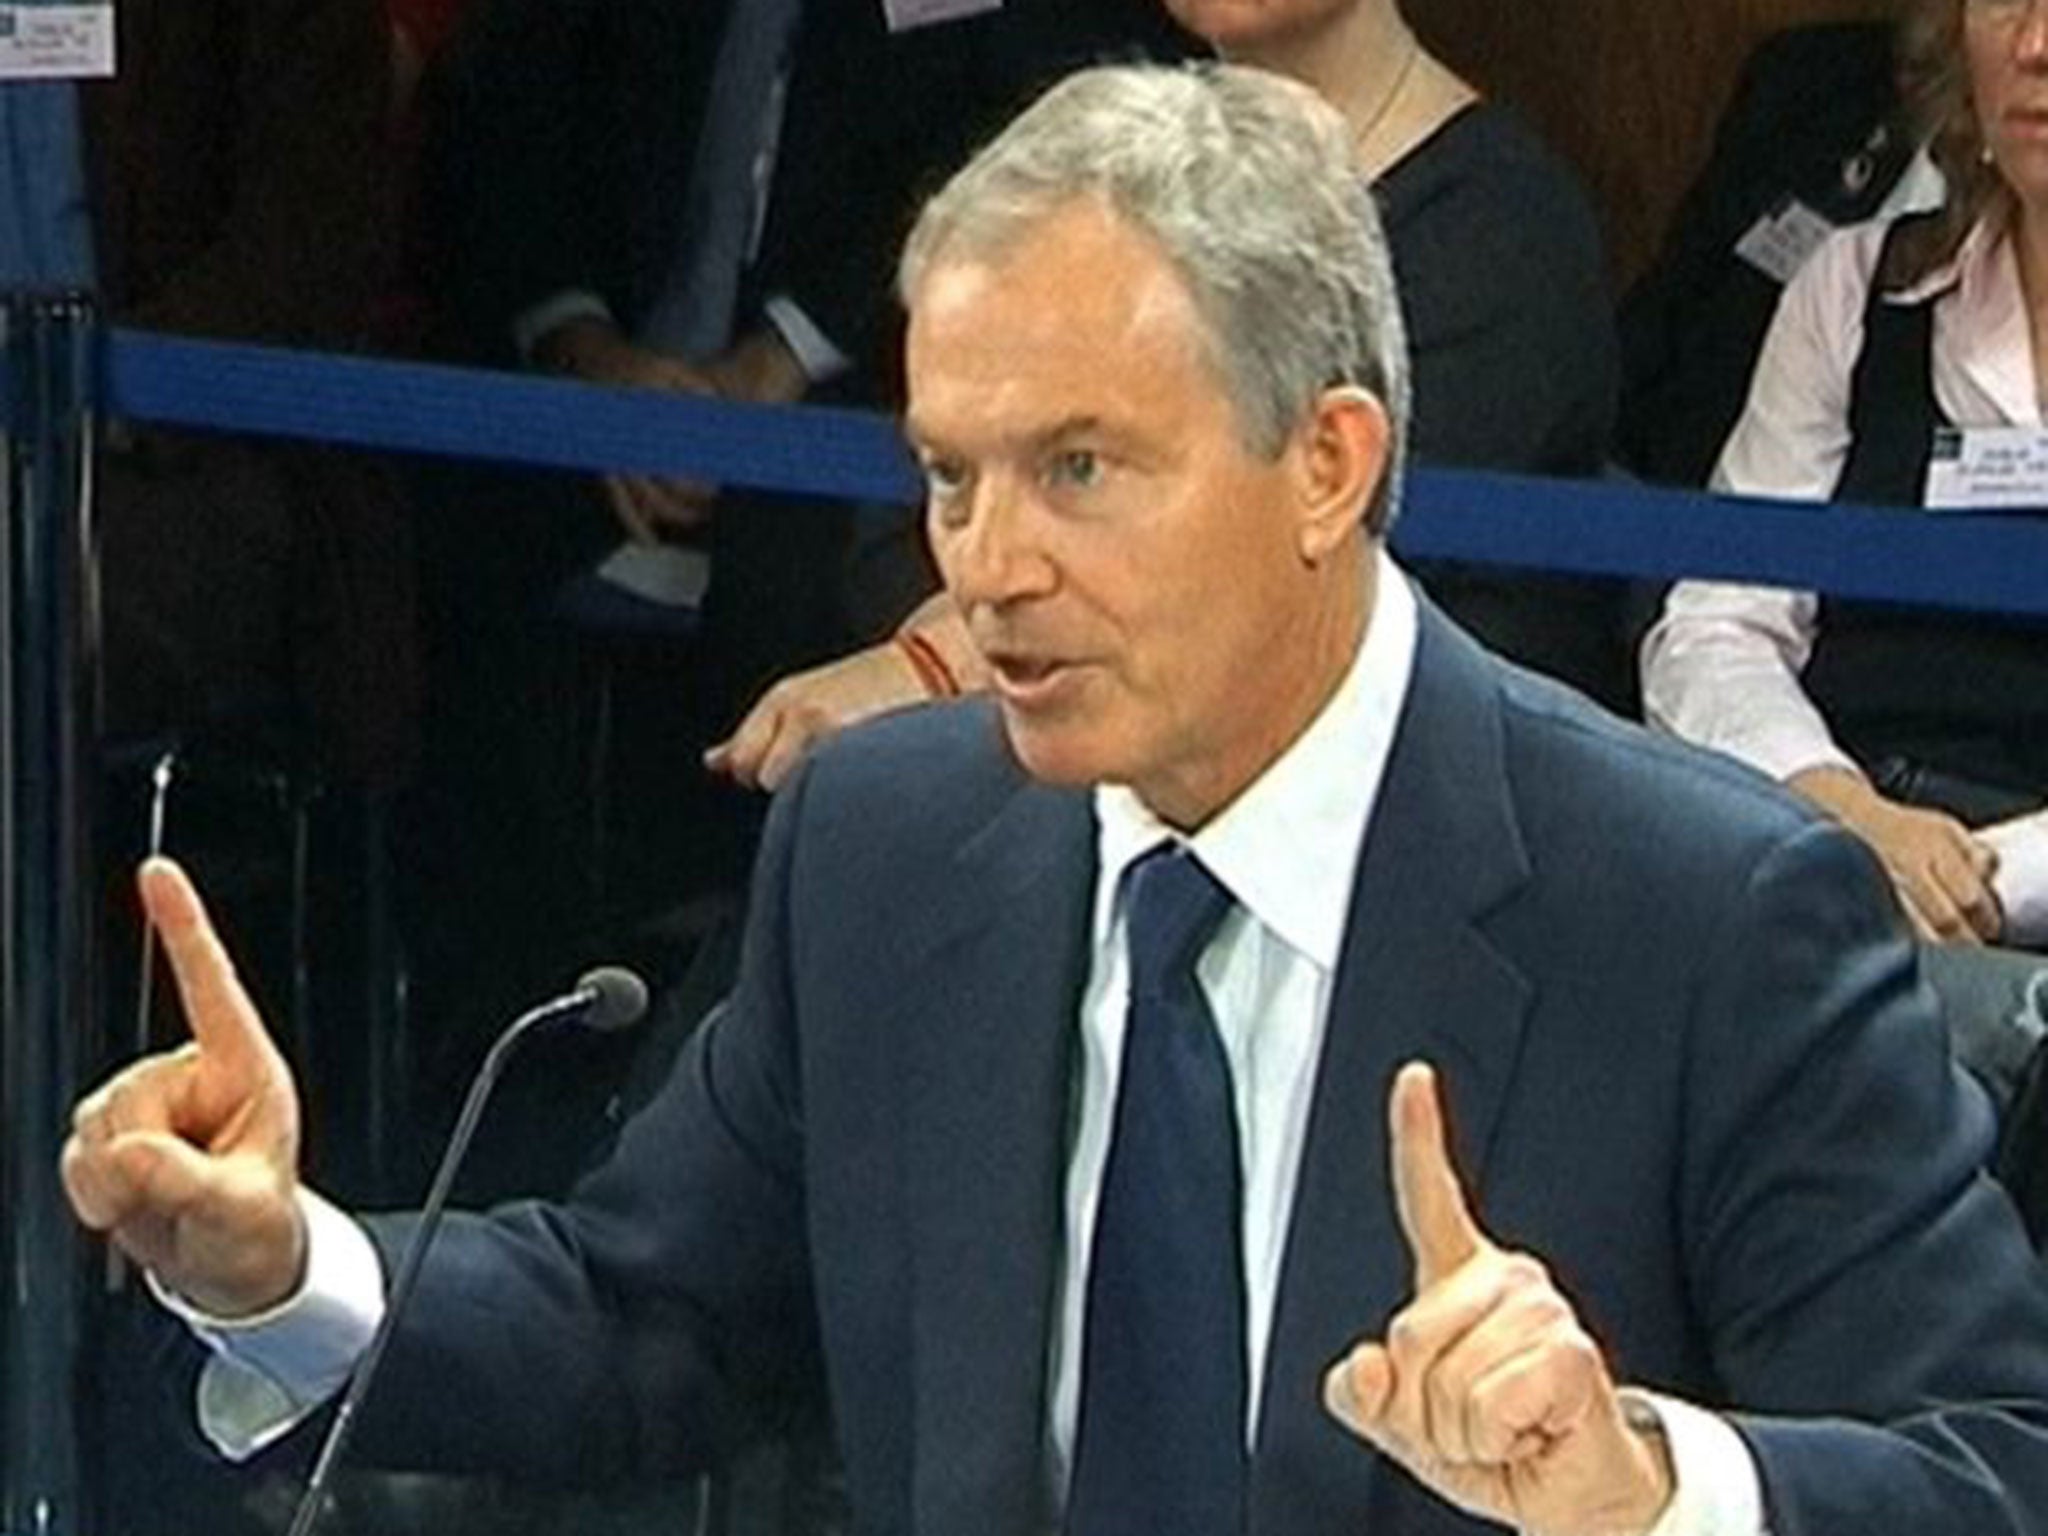 Tony Blair speaking at the Chilcot inquiry in 2011